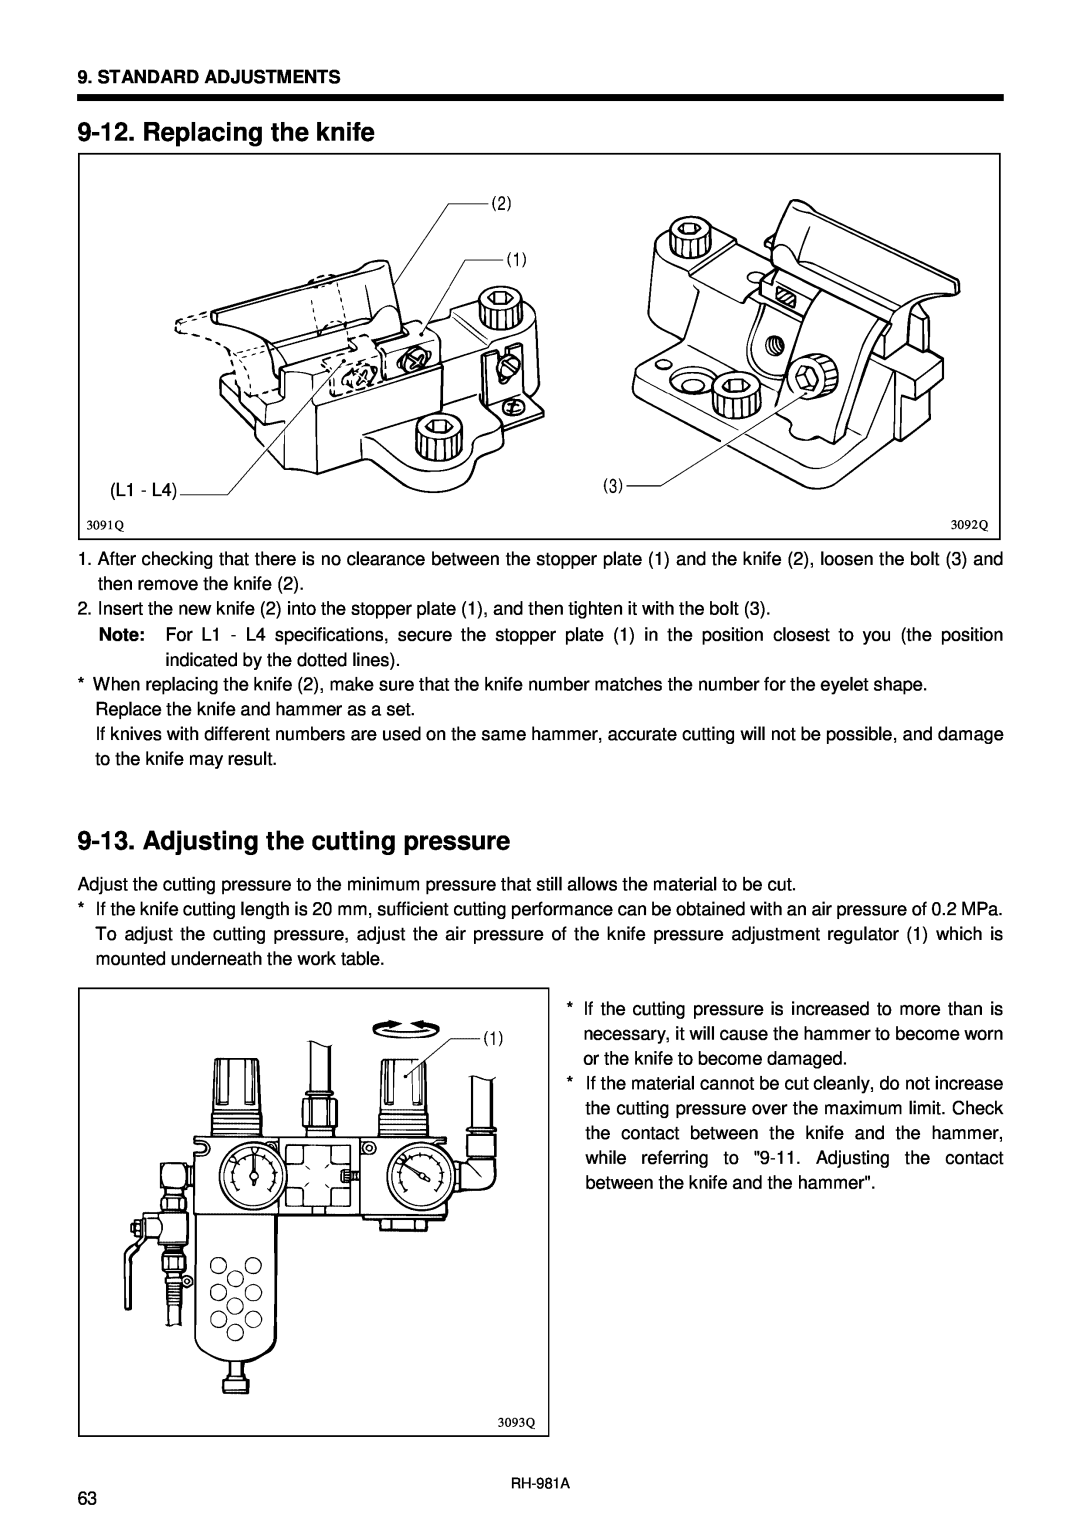 Brother rh-918a manual Replacing the knife, Adjusting the cutting pressure 